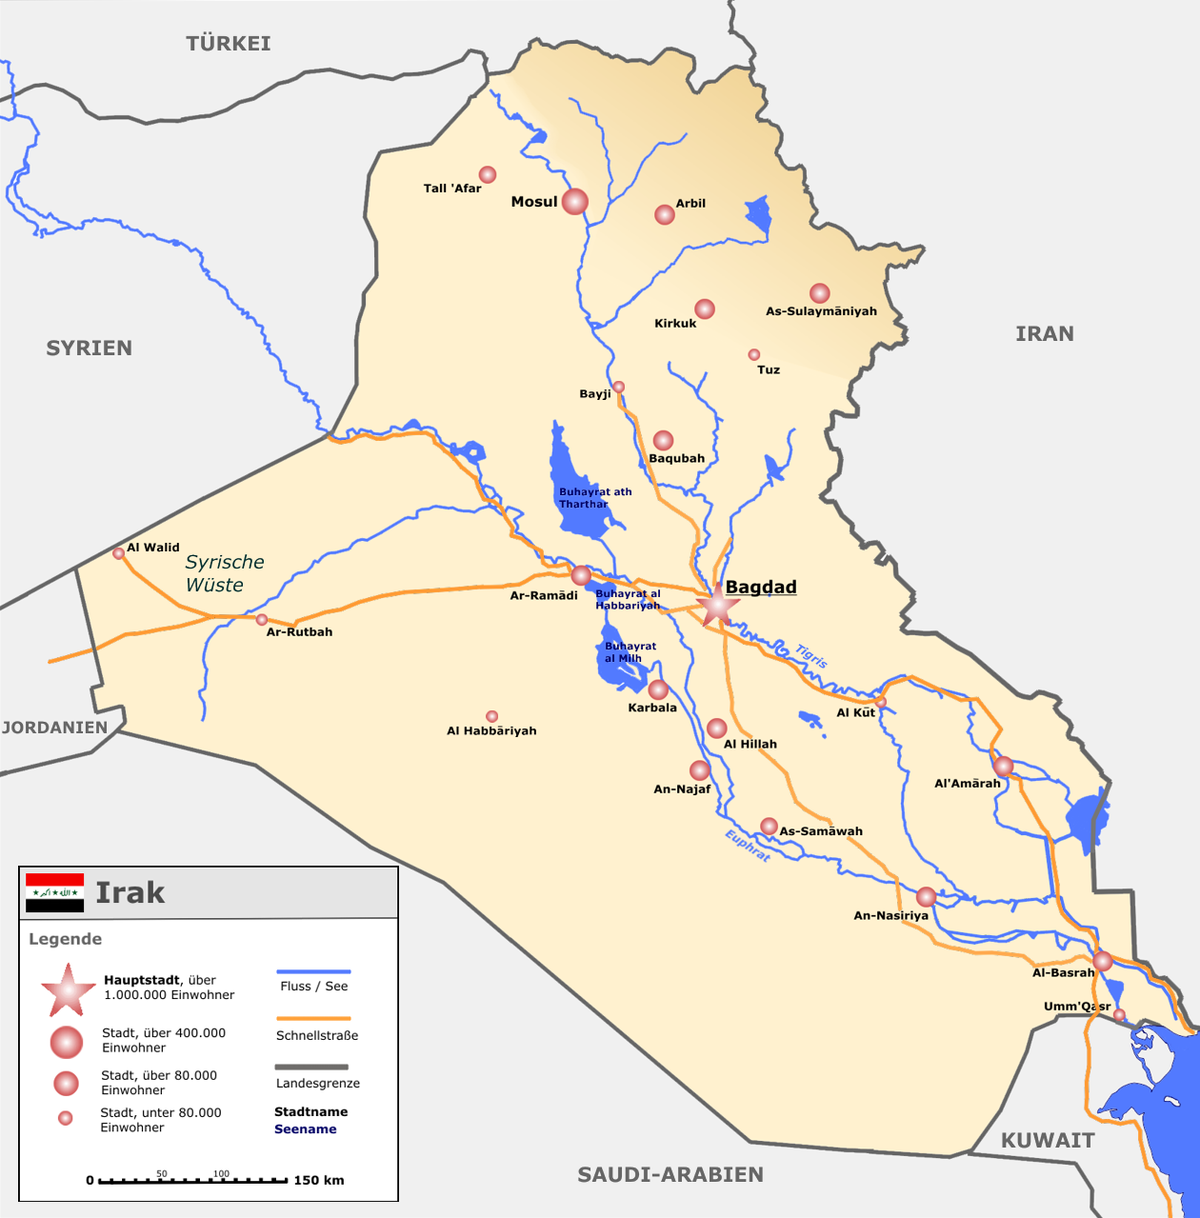 Irak Photos and Images & Pictures